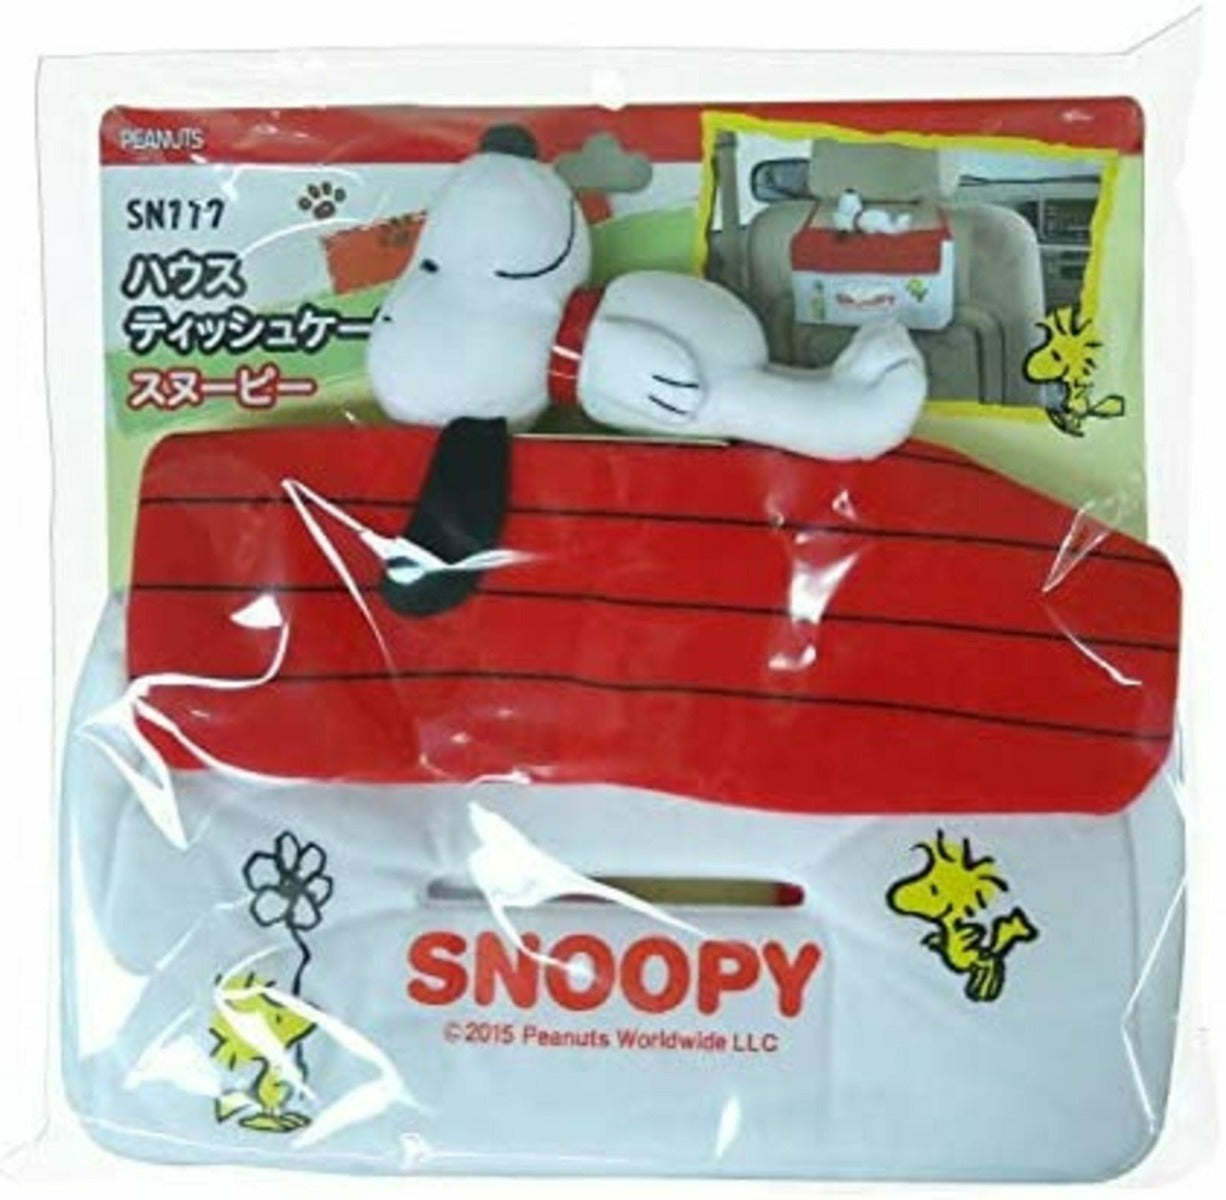 Tissue Case - Snoopy House